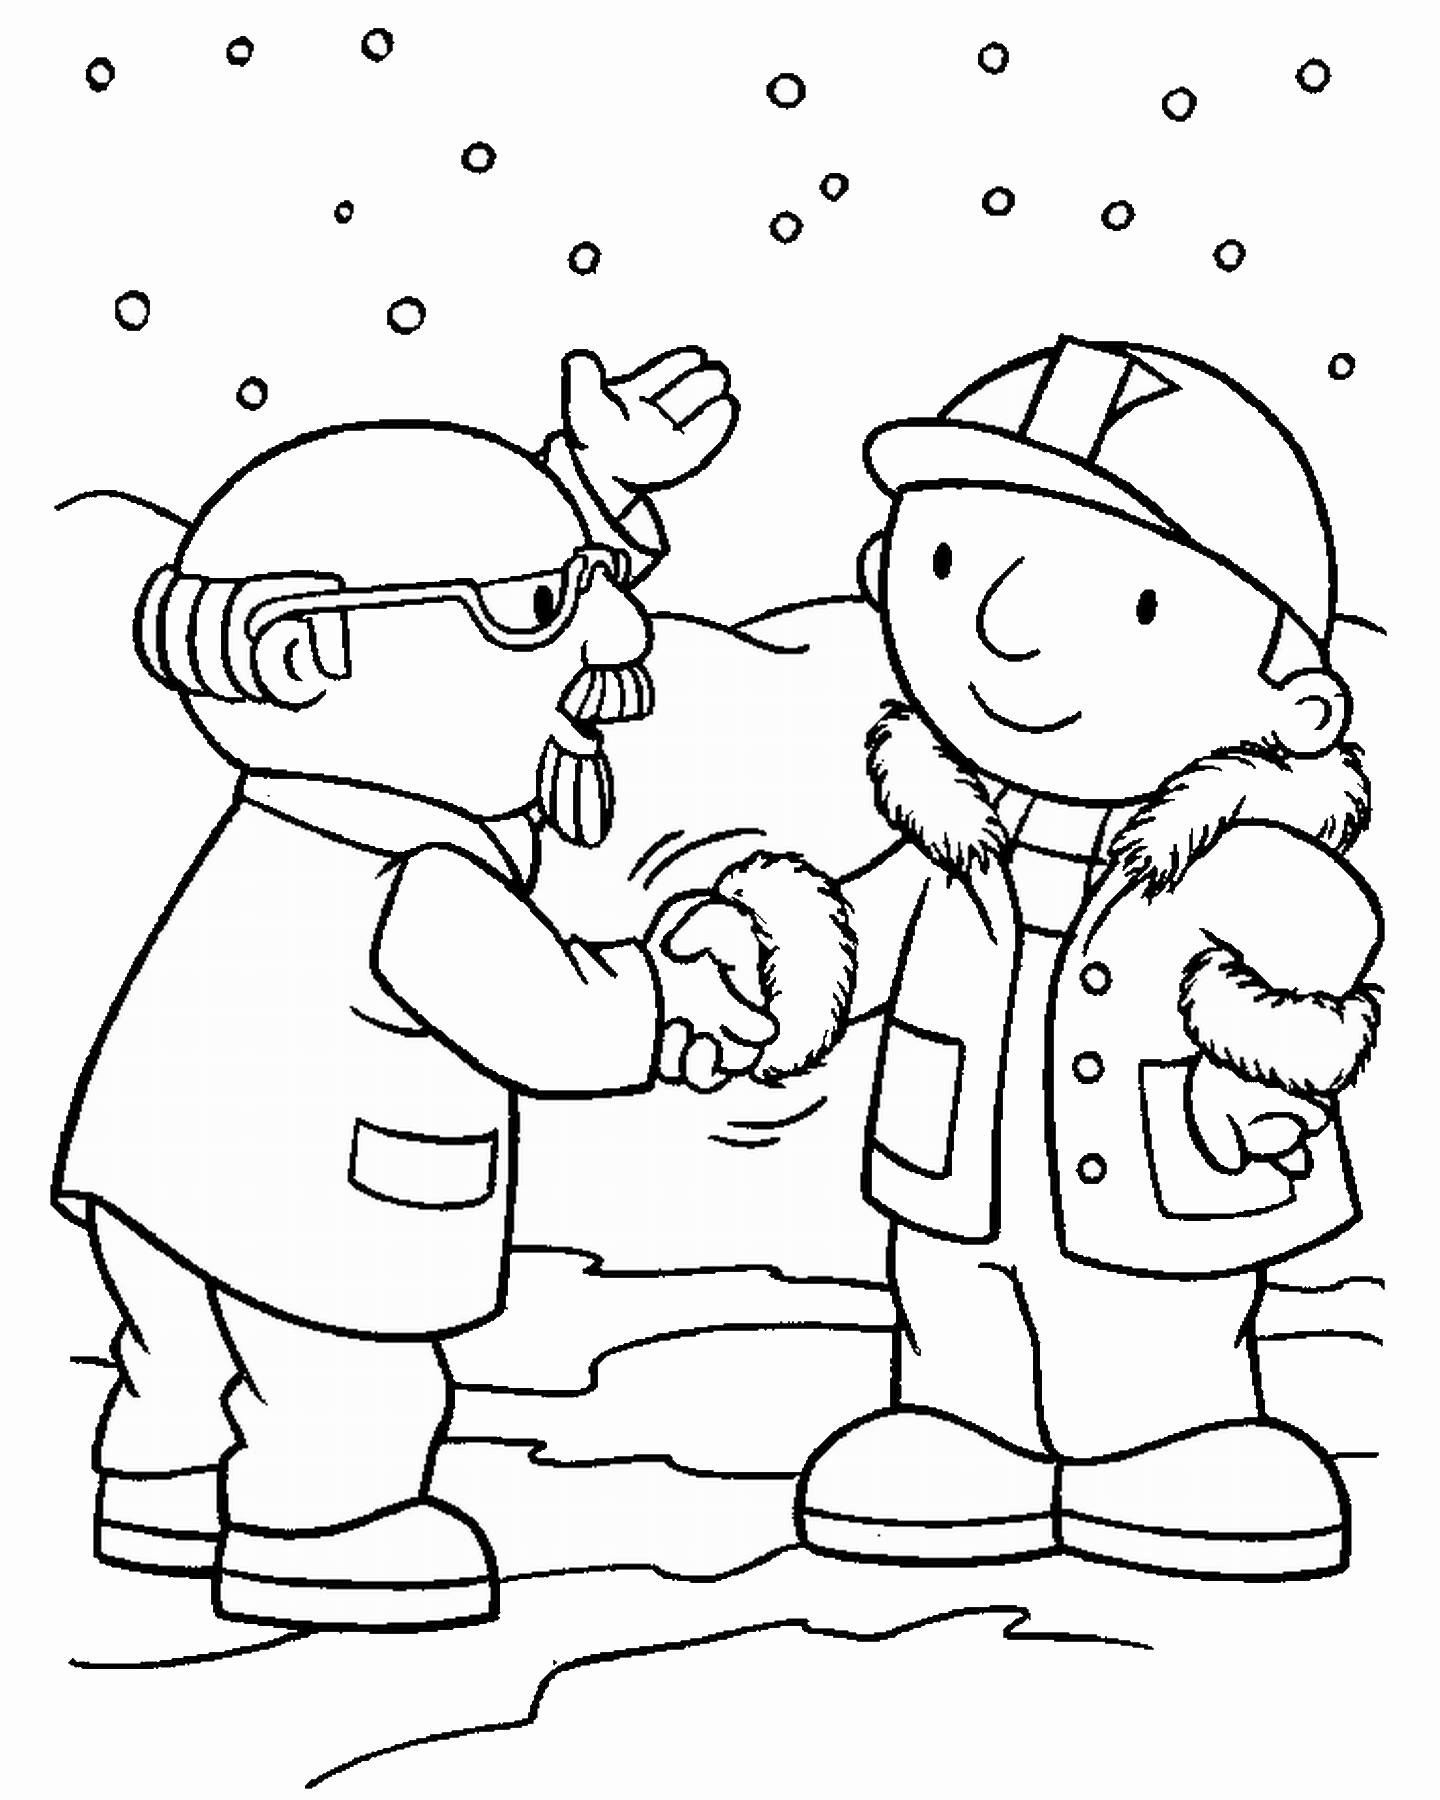 Bob the Builder Coloring Pages TV Film bob the builder_33 Printable 2020 00983 Coloring4free